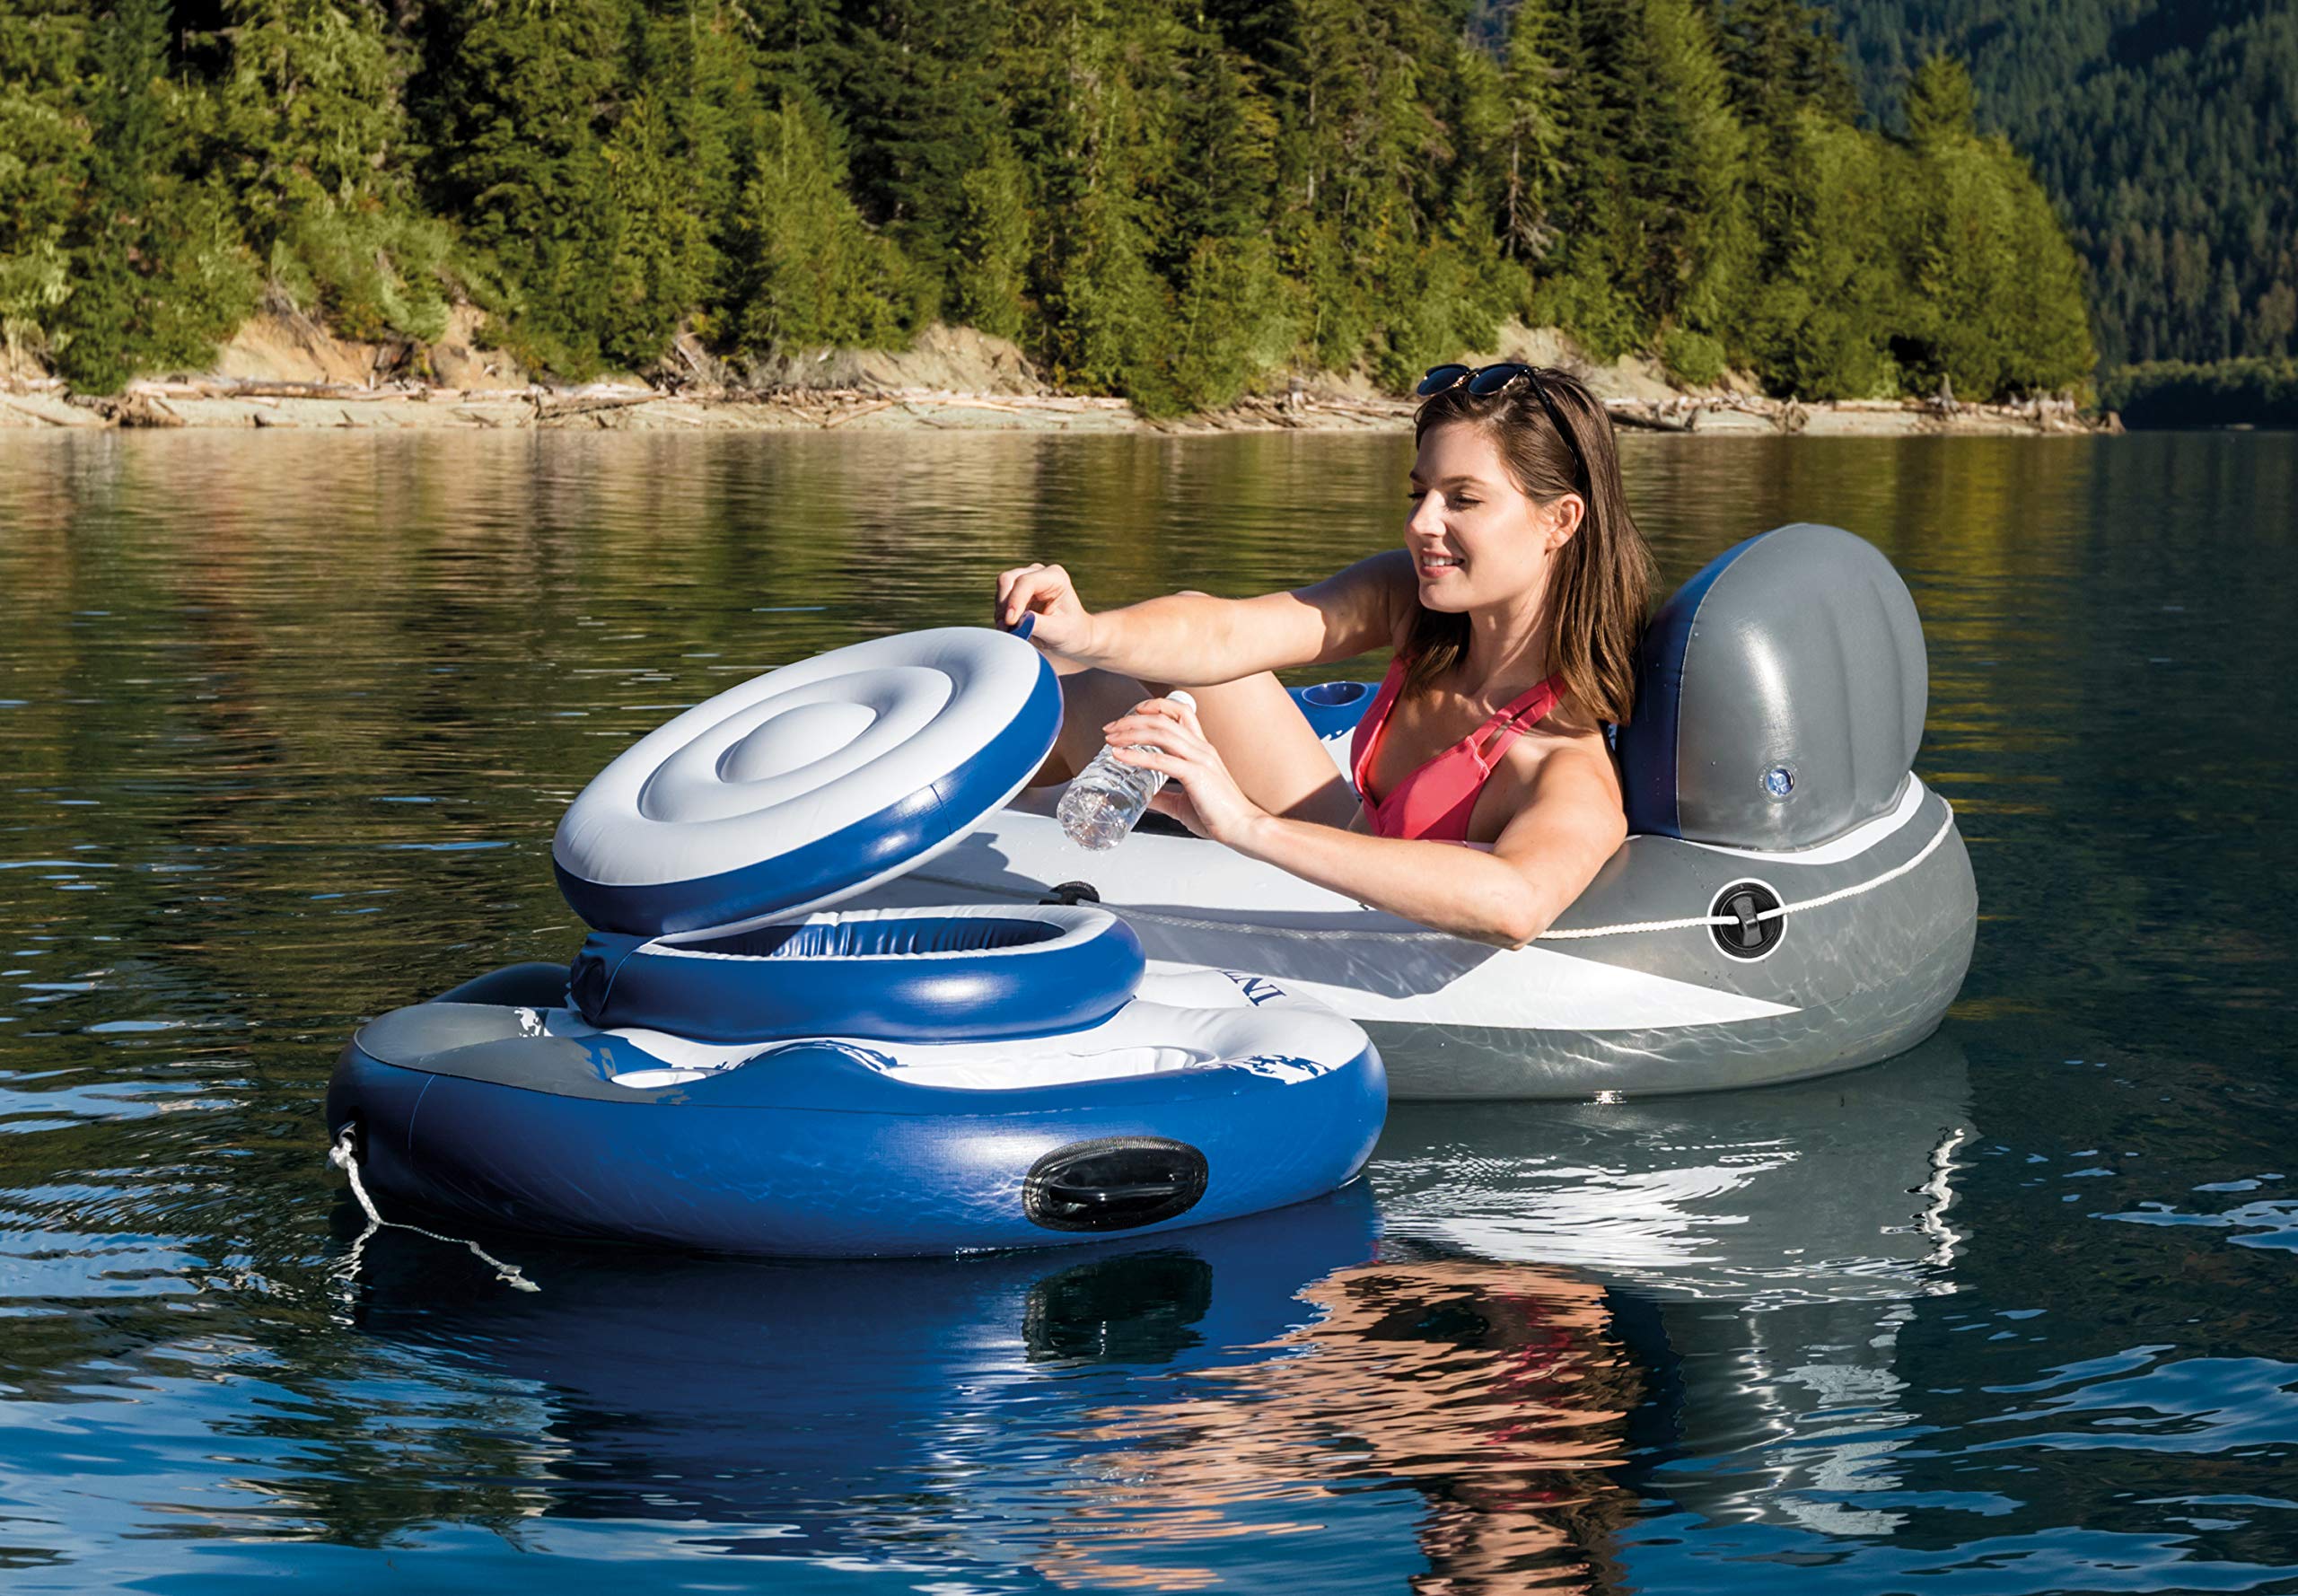 Intex Mega Chill Inflatable Floating Cooler, Multi-Colour, 35 inch, 56822